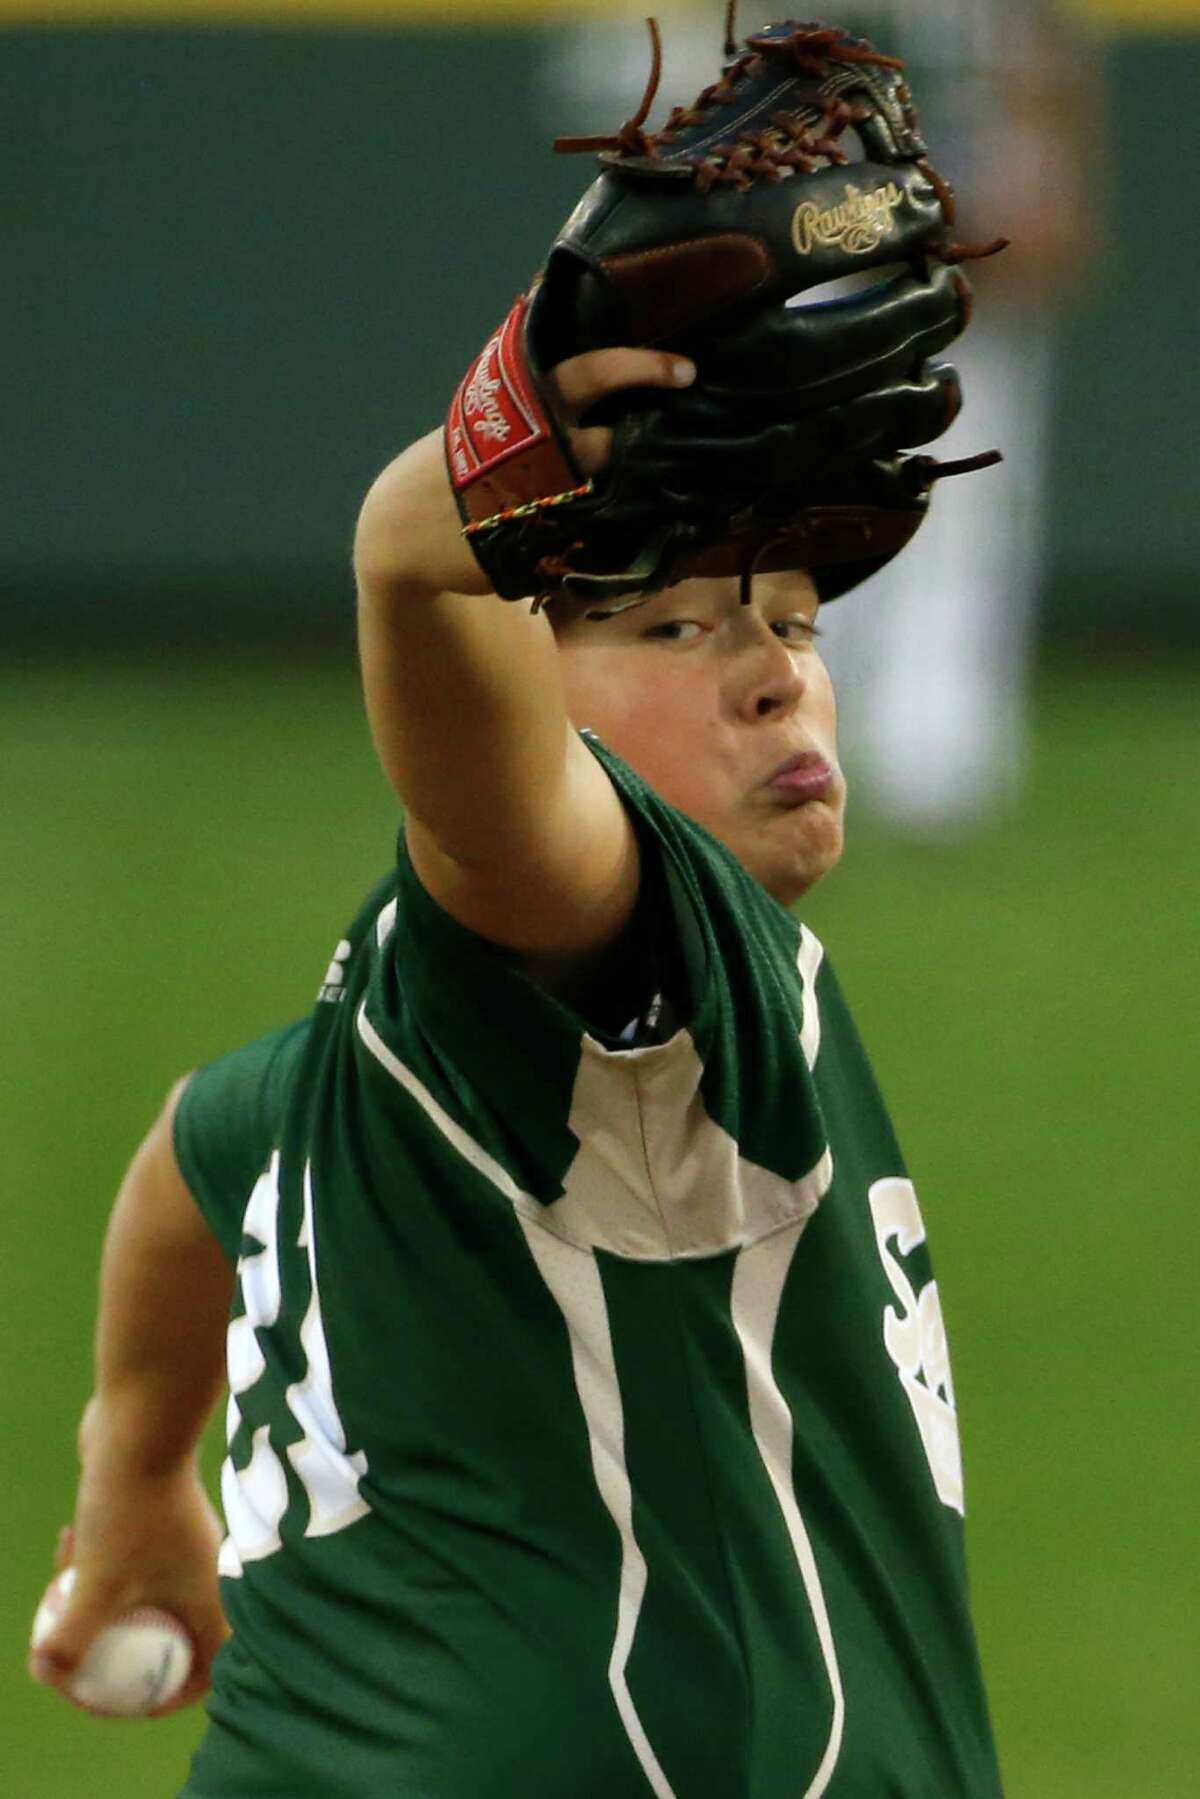 Pearland pitcher Walter Maeker III delivers during the first inning of an elimination baseball game against Chicago at the Little League World Series tournament in South Williamsport, Pa., Tuesday, Aug. 19, 2014. Chicago won 6-1. (AP Photo/Gene J. Puskar)